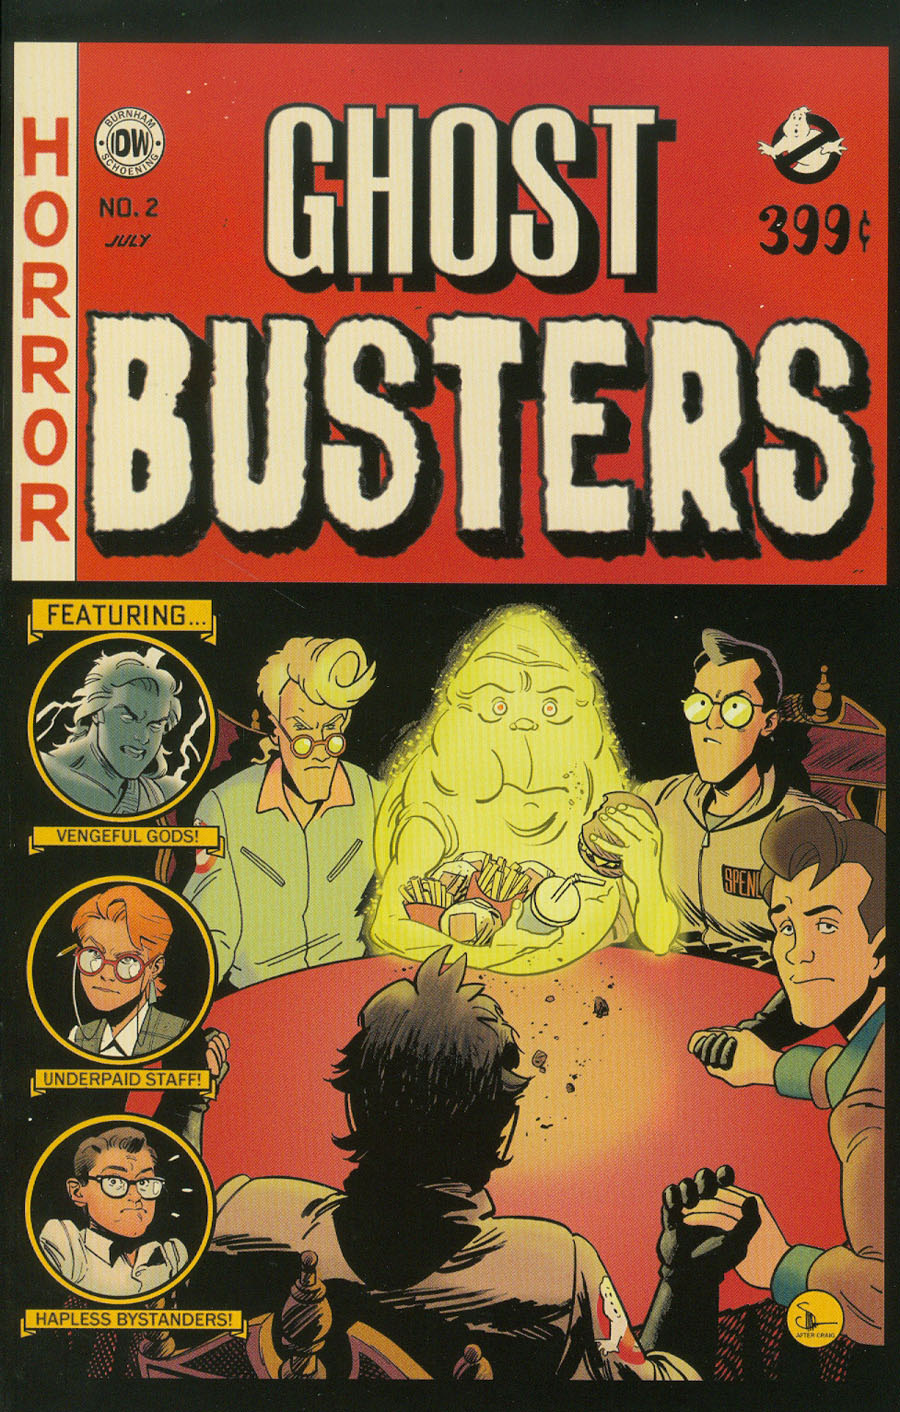 Ghostbusters Get Real #2 Cover B Variant Evan Doc Shaner EC Comics Subscription Cover